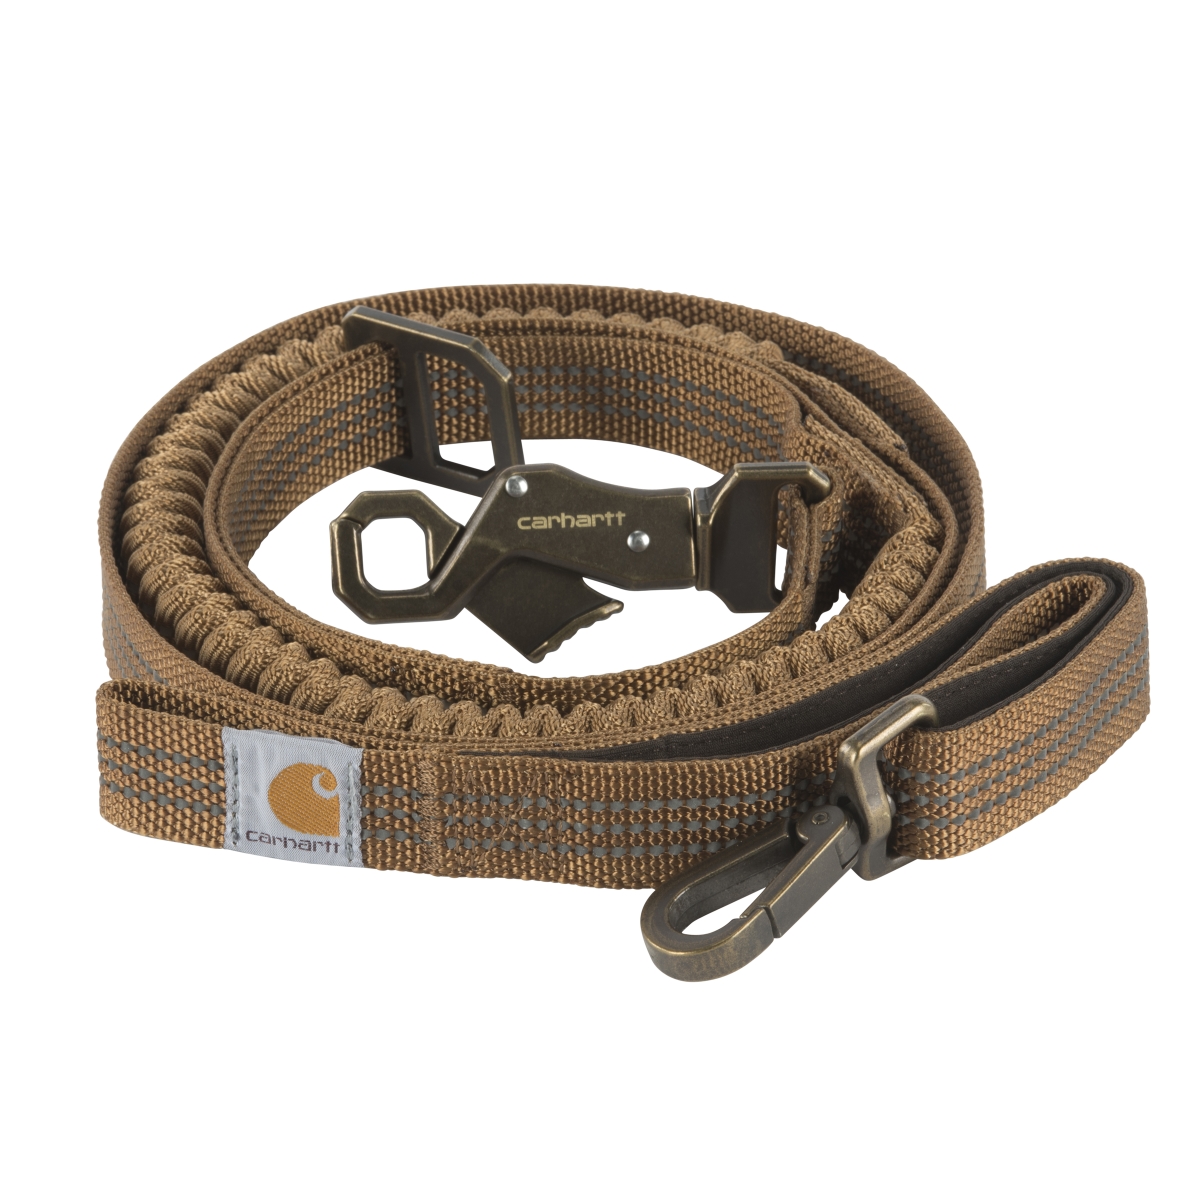 P000028720199 6 Ft. X 1 In. Shock Absorbing Control Dog Leash - Brown & Brushed Brass